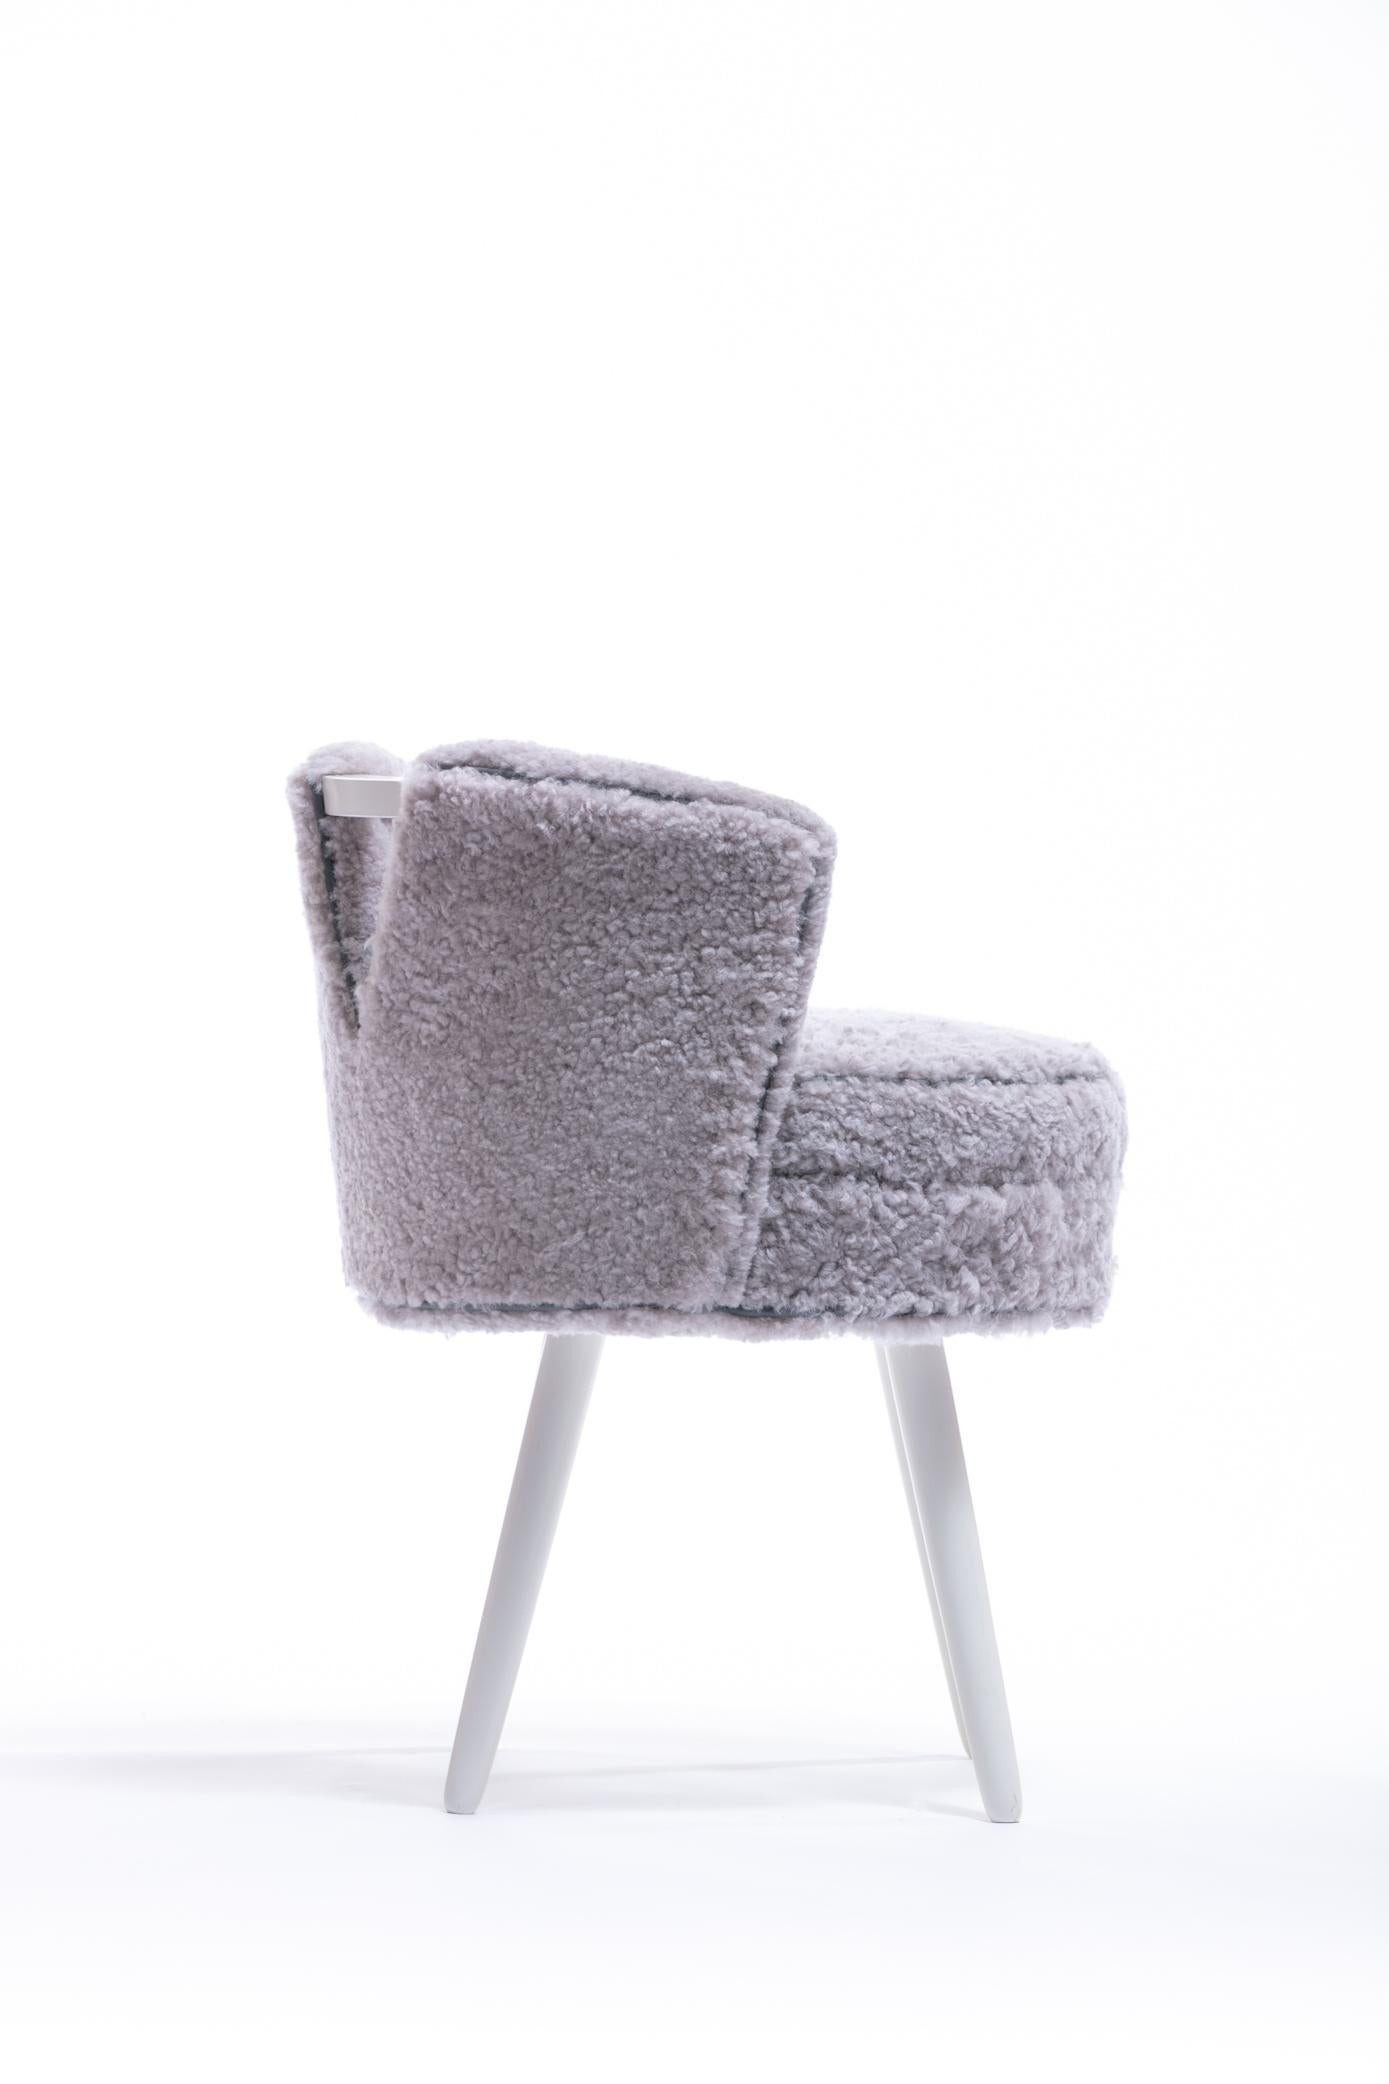 Paul Frankl Style Vanity Stool Upholstered in Shearling For Sale 1